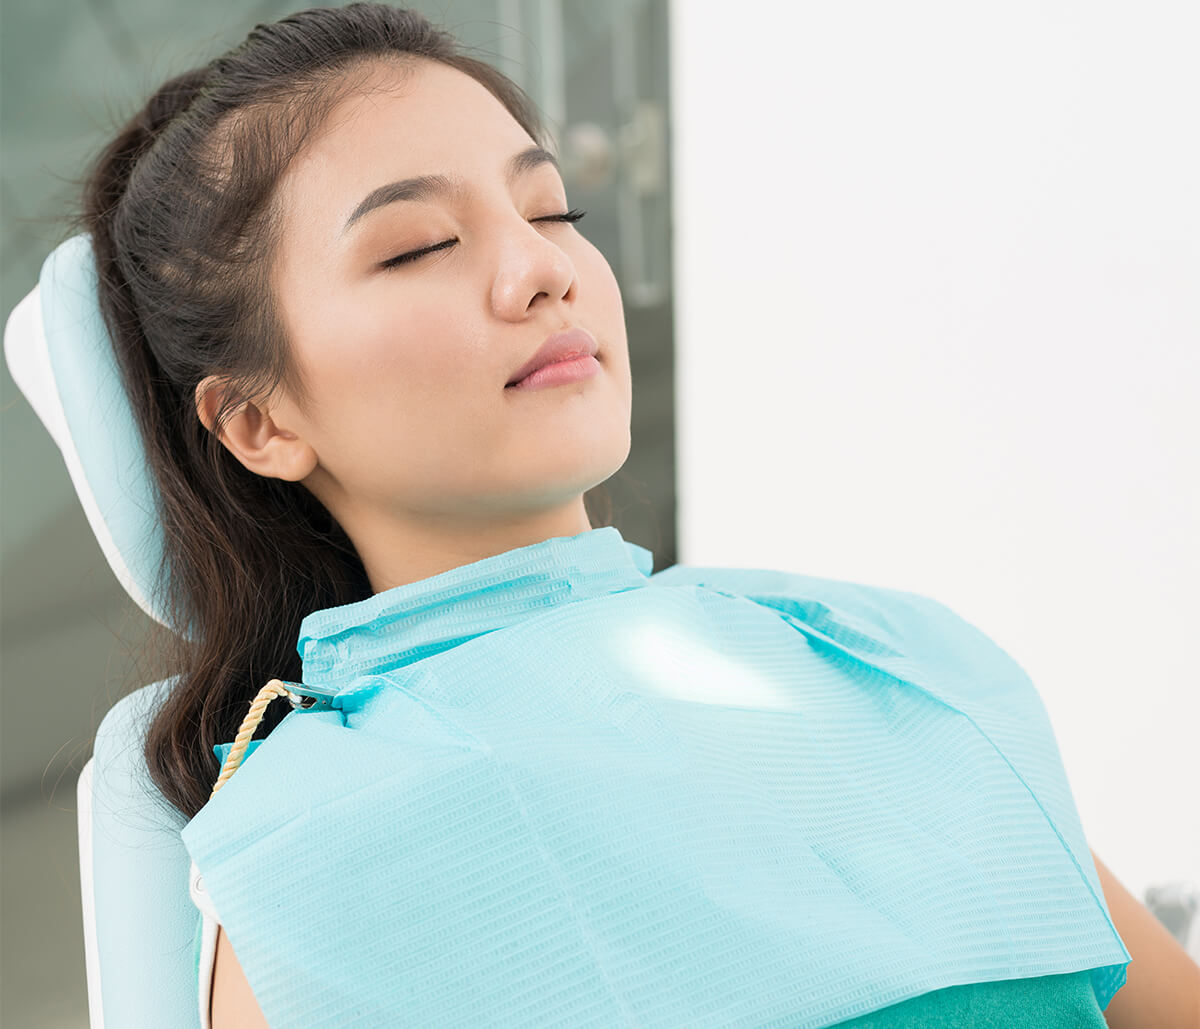 Dentists for Anxious Patient in Longview TX Area